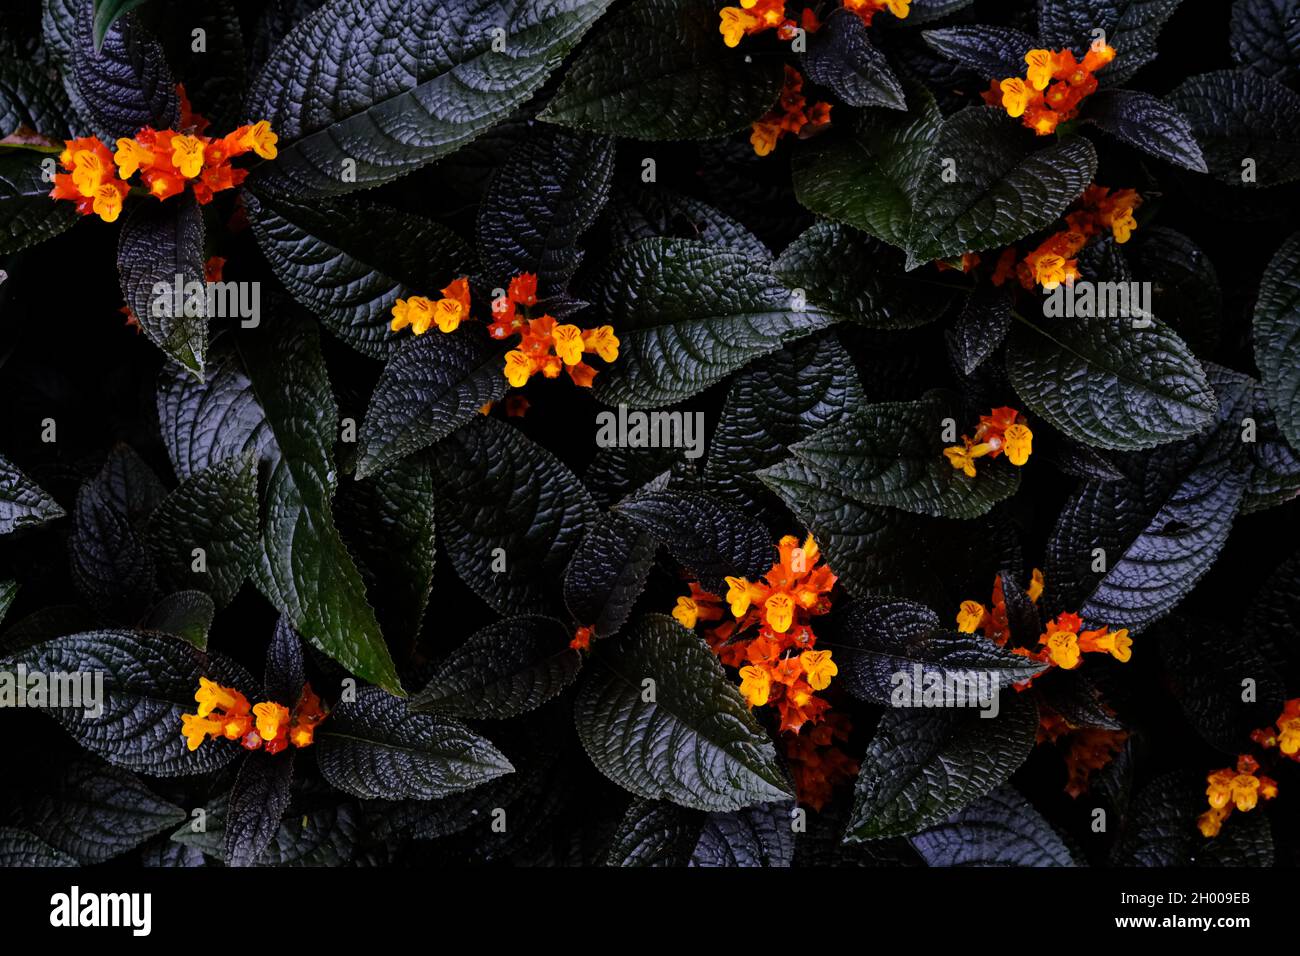 Golden bell tree pickled as beautiful as gold (Chrysothemis pulchella also known as sunset bells, black flamingo, copper leaf or simply chryothemis) Stock Photo